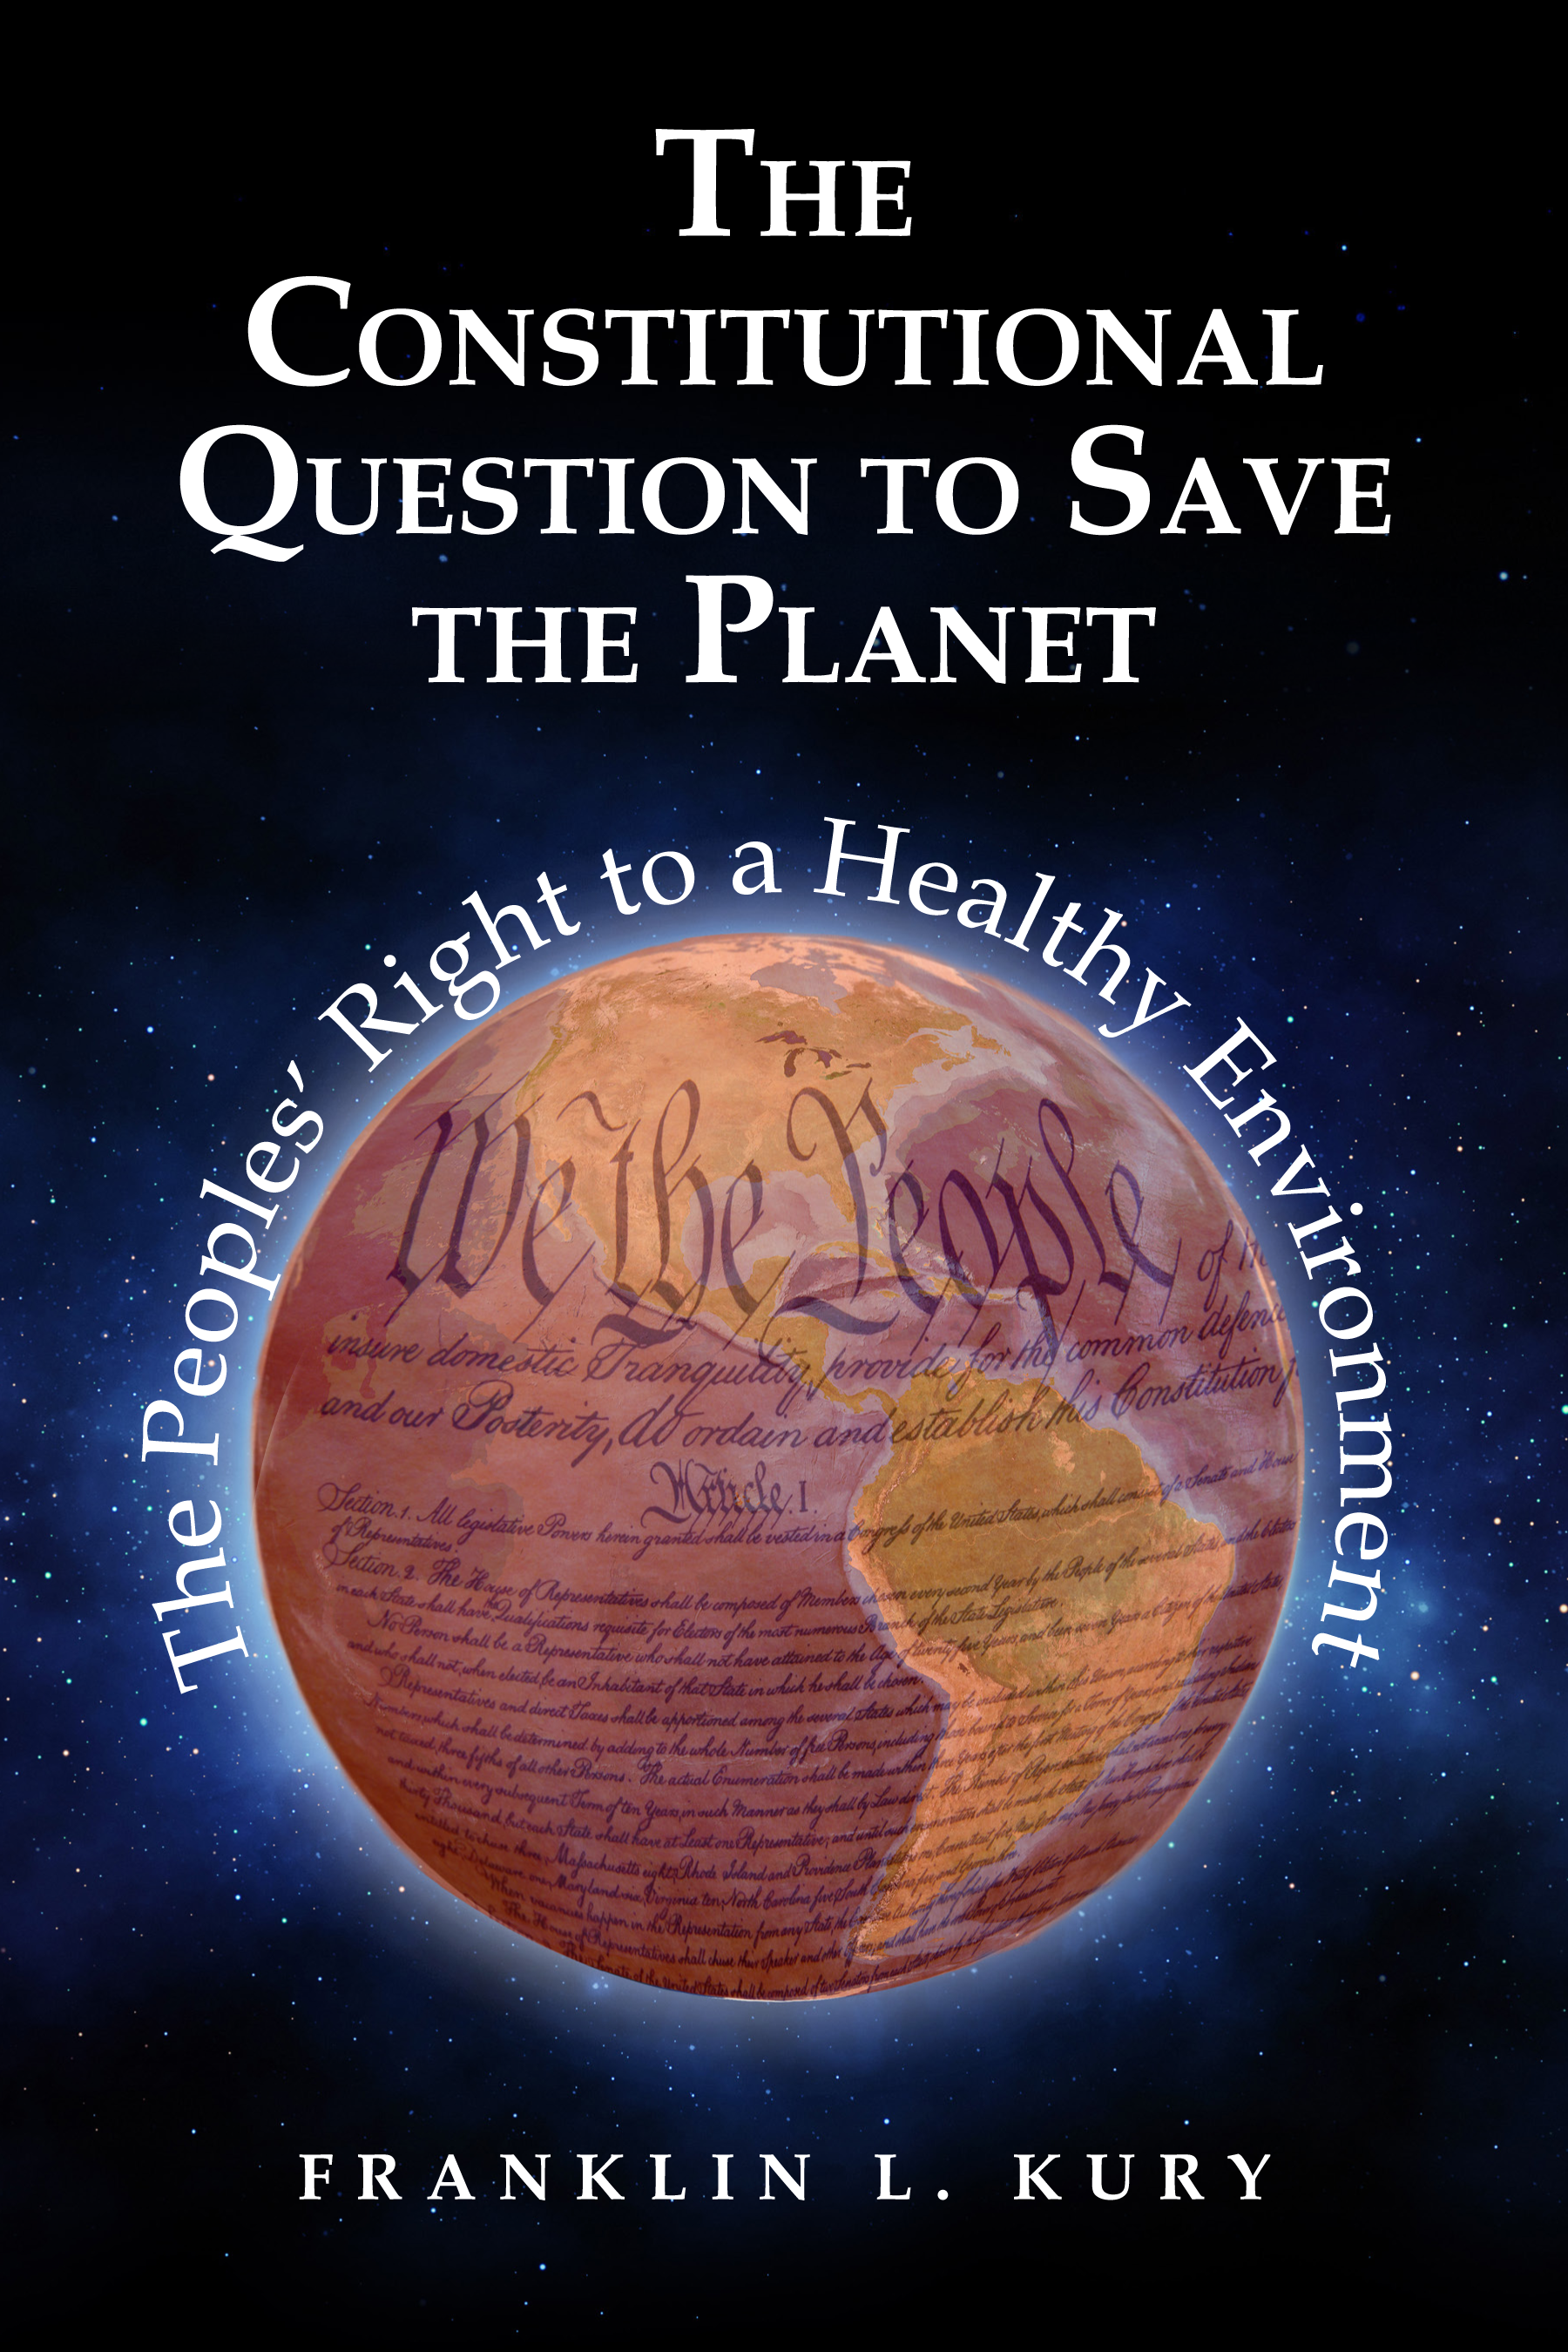 The Constitutional Question to Save the Planet book cover